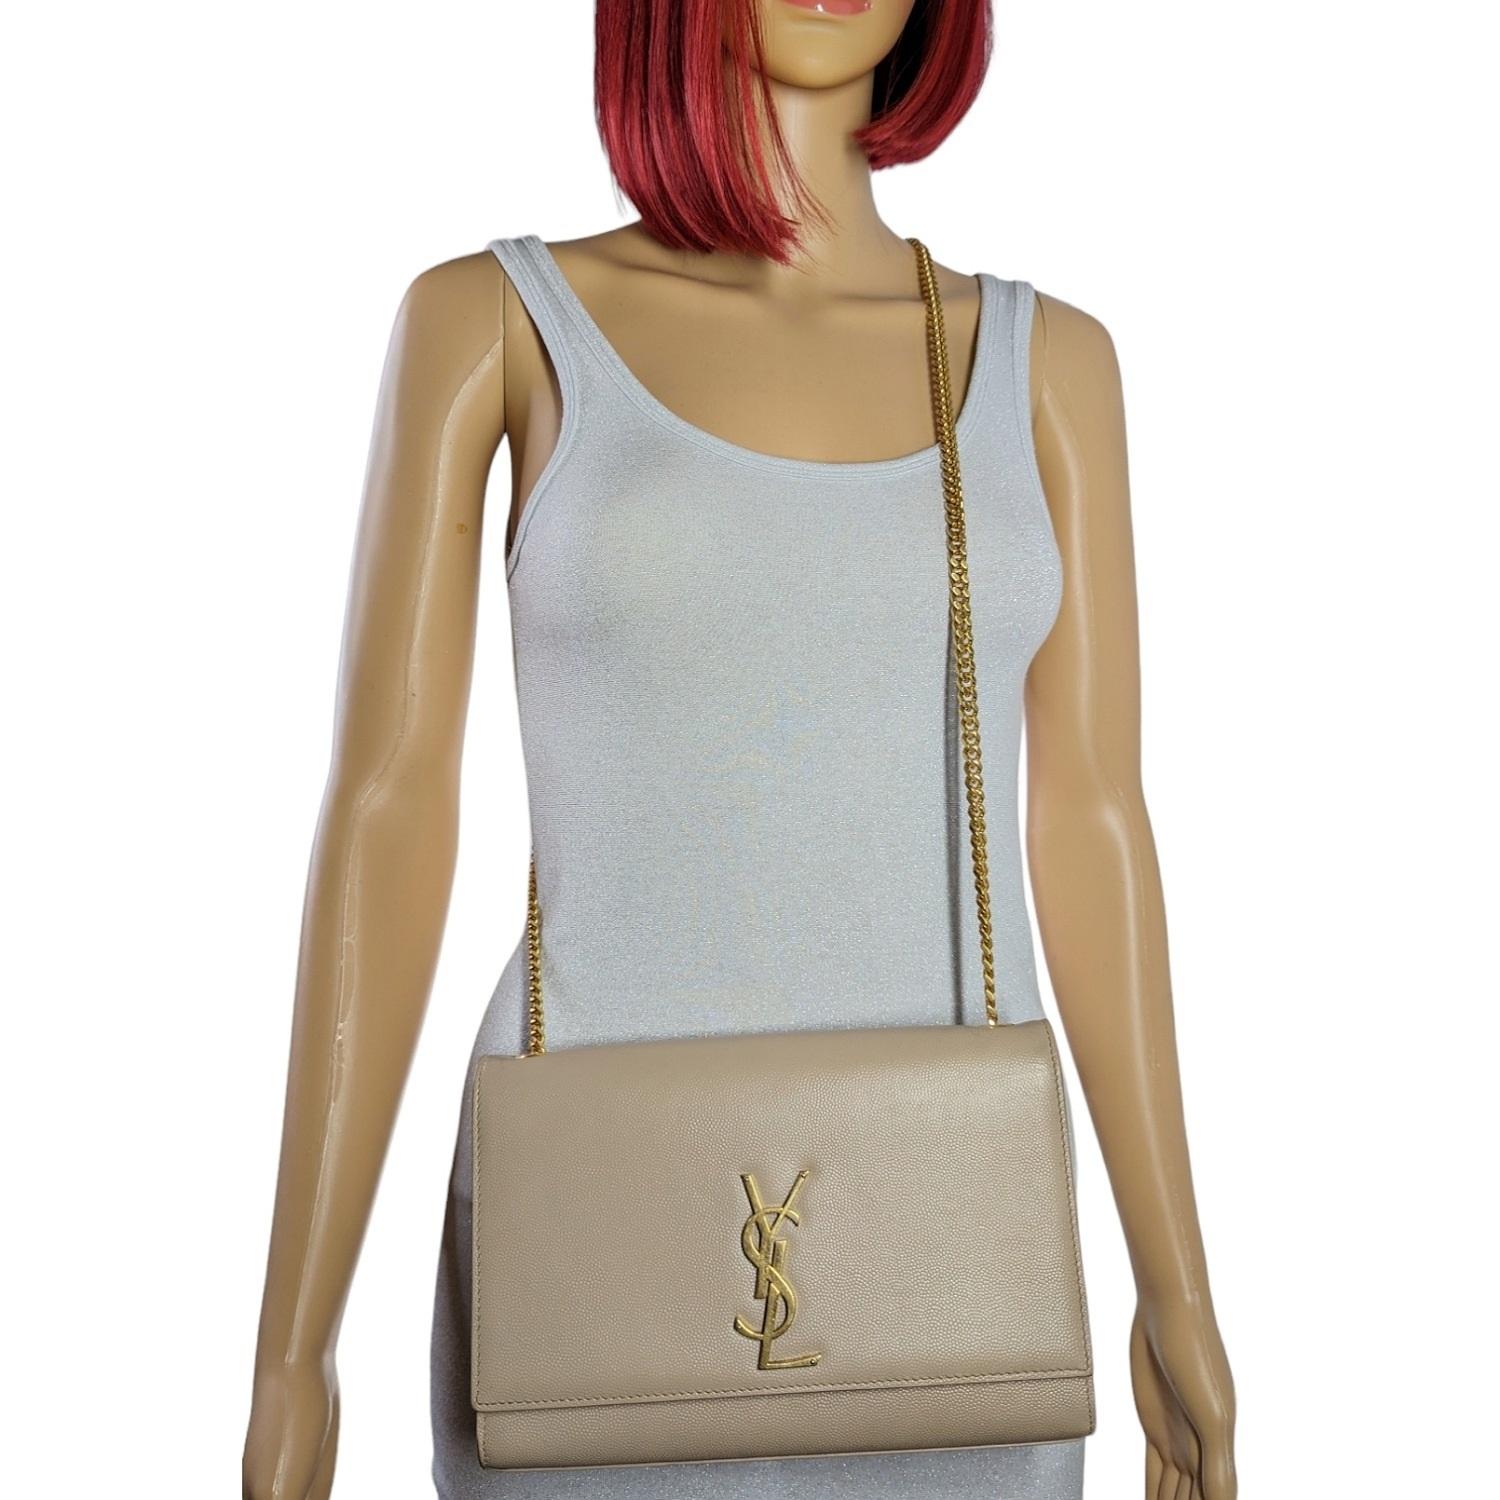 An iconic insignia nods to the Parisian fashion house's heritage on this chic shoulder bag designed in perfect proportions. Retail $2,400.

Designer: YSL Saint Laurent
Material: 100% Calfskin
Origin: Italy
Color(s): Dark Beige
Measurements: 9 ½